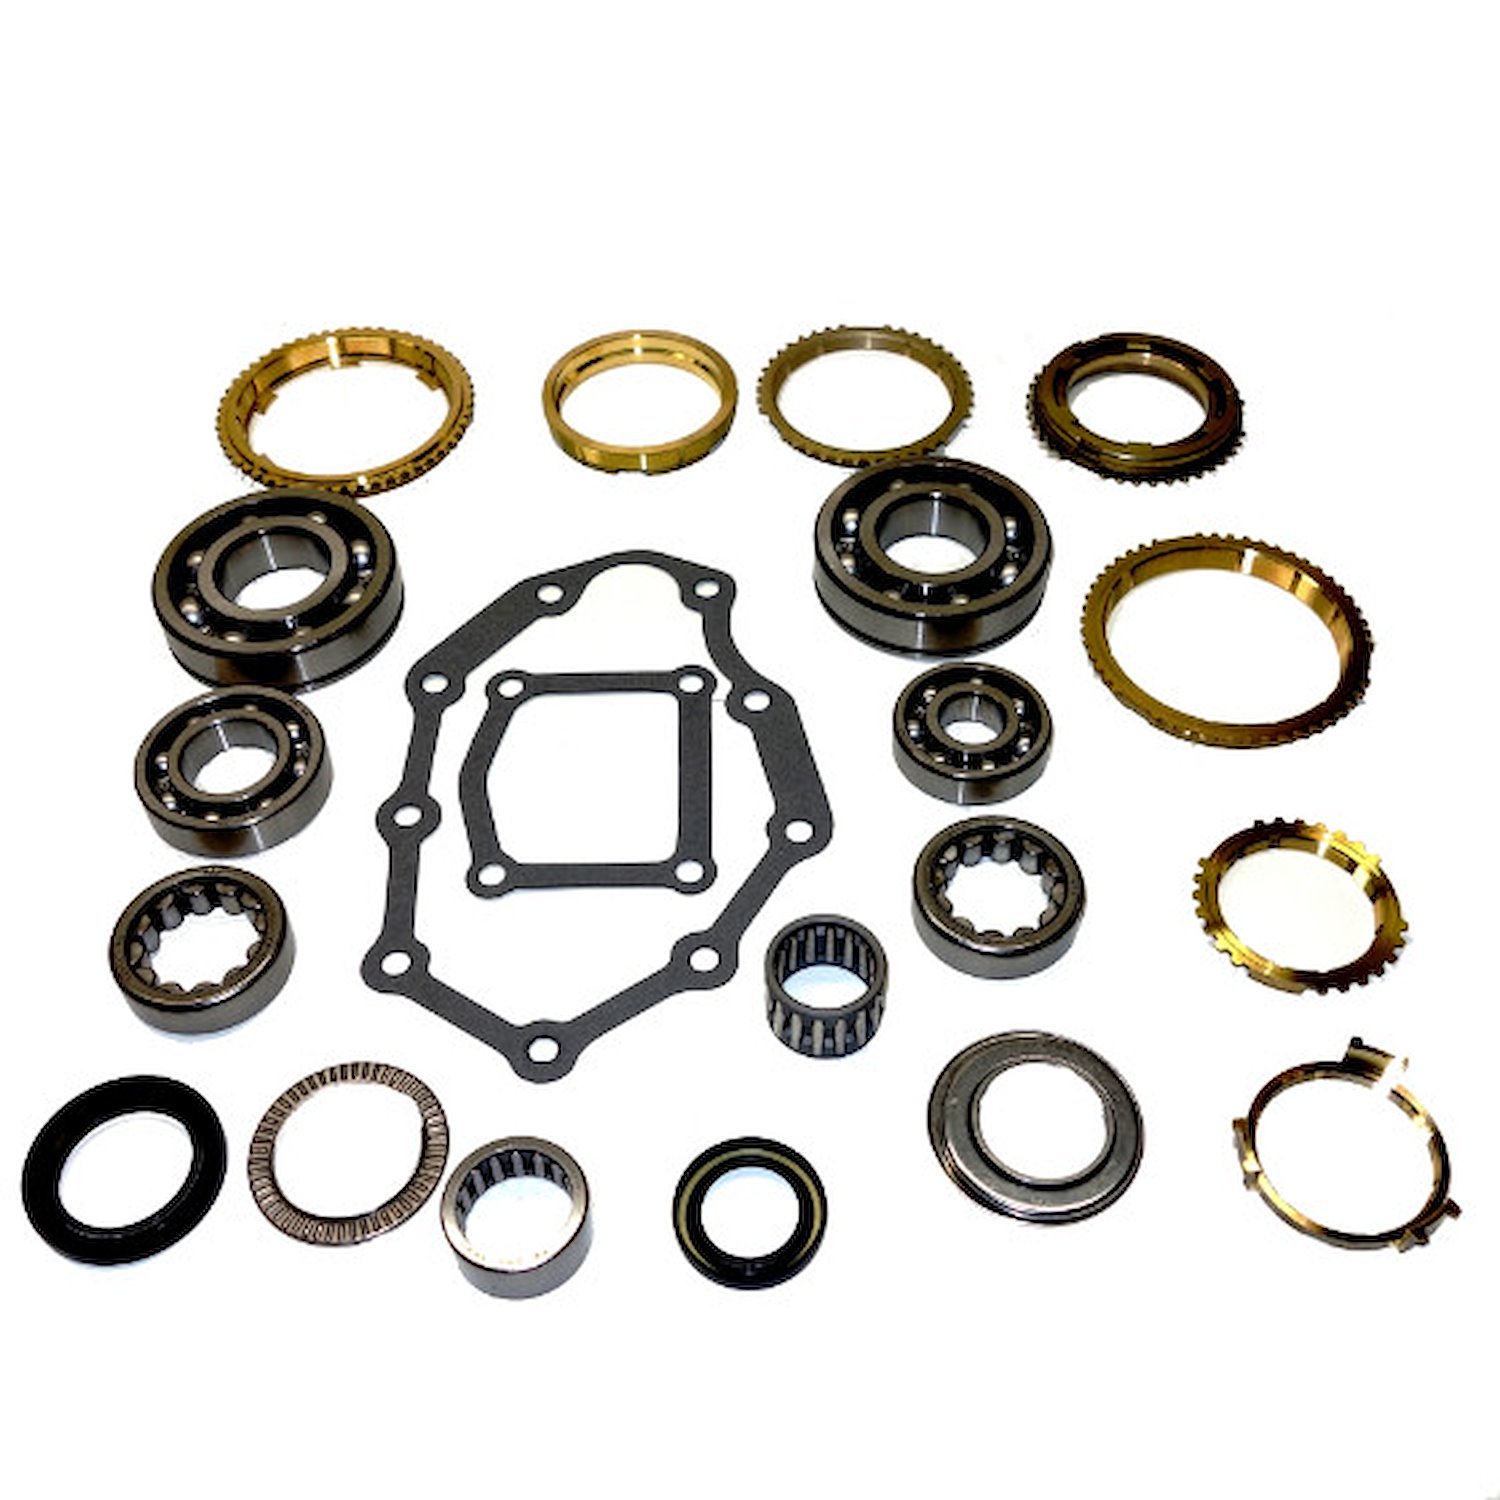 USA Standard 73921 Manual Trans Bearing Kit, 1991-1993 Nissan 300Zx 5-Spd With Synchros